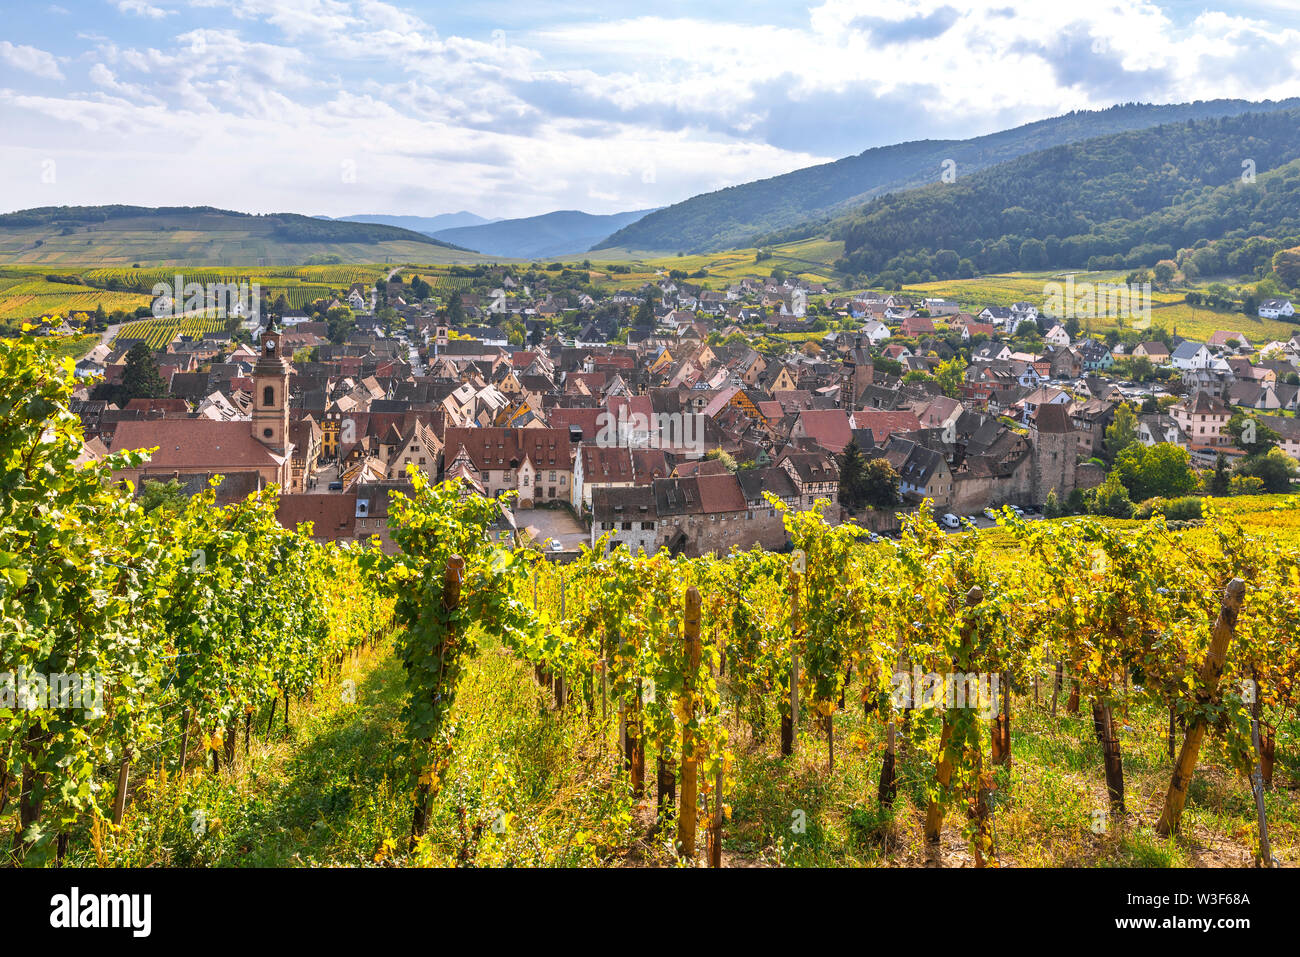 panorama of wine village Riquewihr, Alsace, France, village and hills with vineyards seen from above Stock Photo